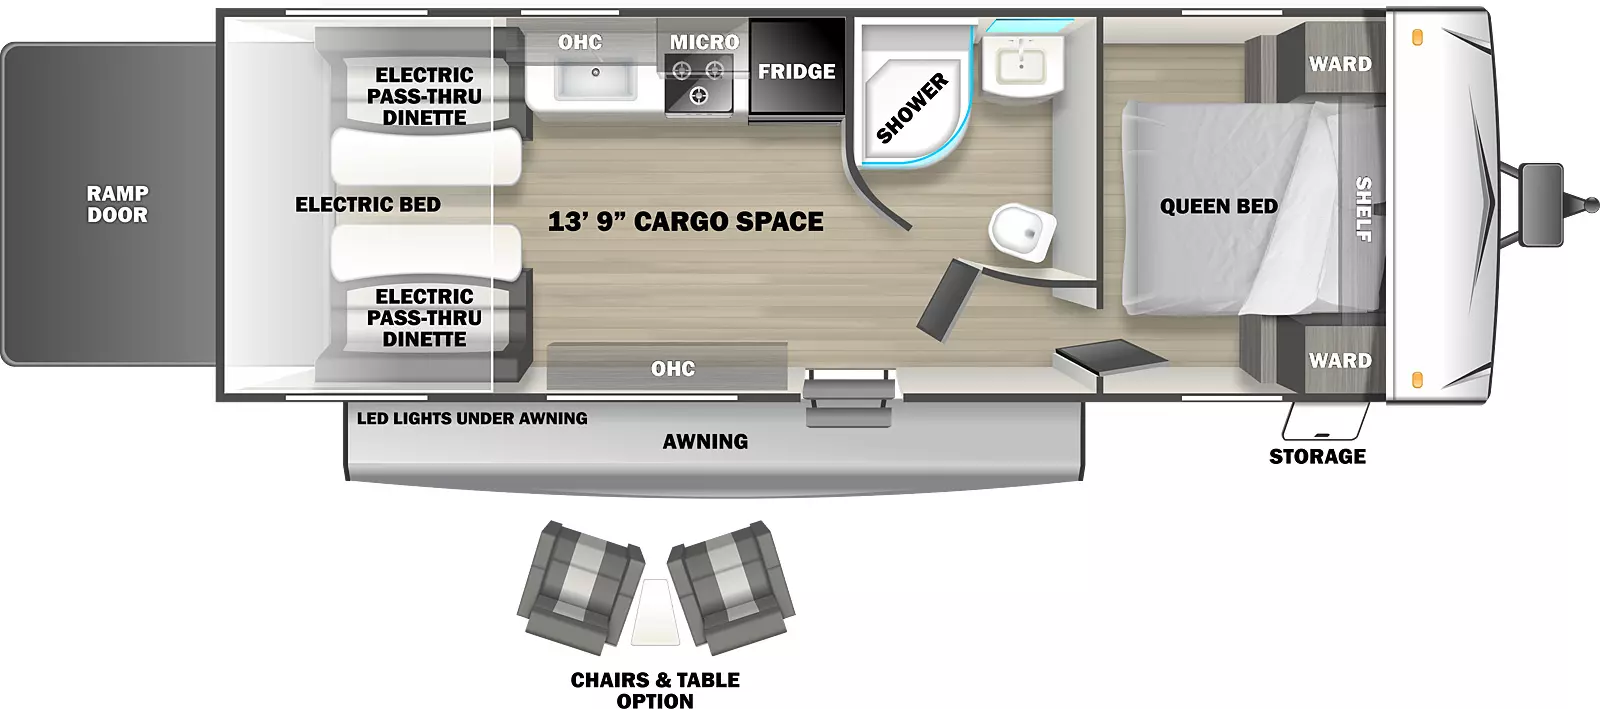 The Shockwave 24RQMX is a toy hauler trailer with one entry door, a rear ramp door, front storage, and 14' awning on the exterior. Inside, a walkaround RV queen bed is located in the front of the unit, with wardrobe cabinets on either side and a shelf overhead. Outside the bedroom is a short hallway with the bathroom located to the right. The bathroom contains a sink, glass radius shower, and commode. In the main living area, the kitchen is located on the off-door side with refrigerator, cooktop and oven, and sink, with cabinets and microwave mounted overhead. Additional overhead cabinets are mounted on the off-door side. In the rear of the unit are two flip sofa benches, one on either side, with a split dinette table between them. These convert to a standard electric bed. There is an option to add a pair of upholstered chairs and table to this unit under the cabinets on the door side. This trailer provides 13' 9" of interior cargo space.